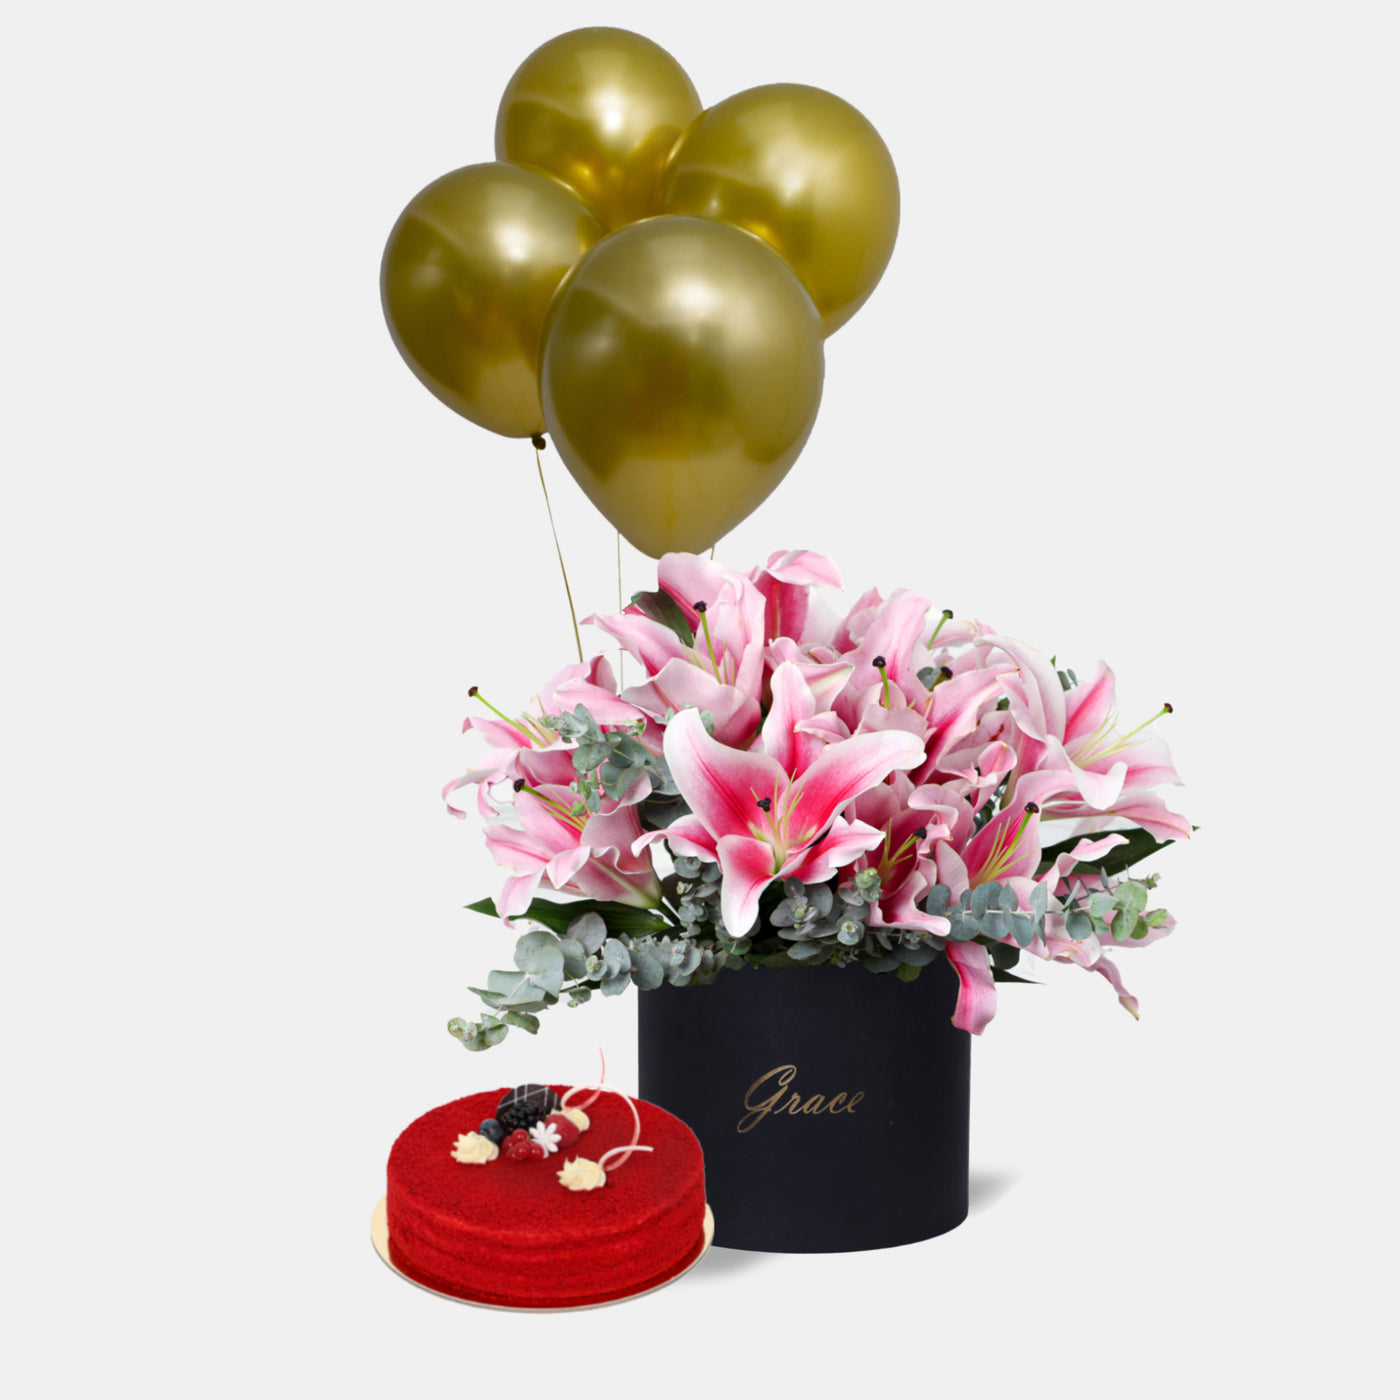 Pink Lily in Box with Cake and Balloons